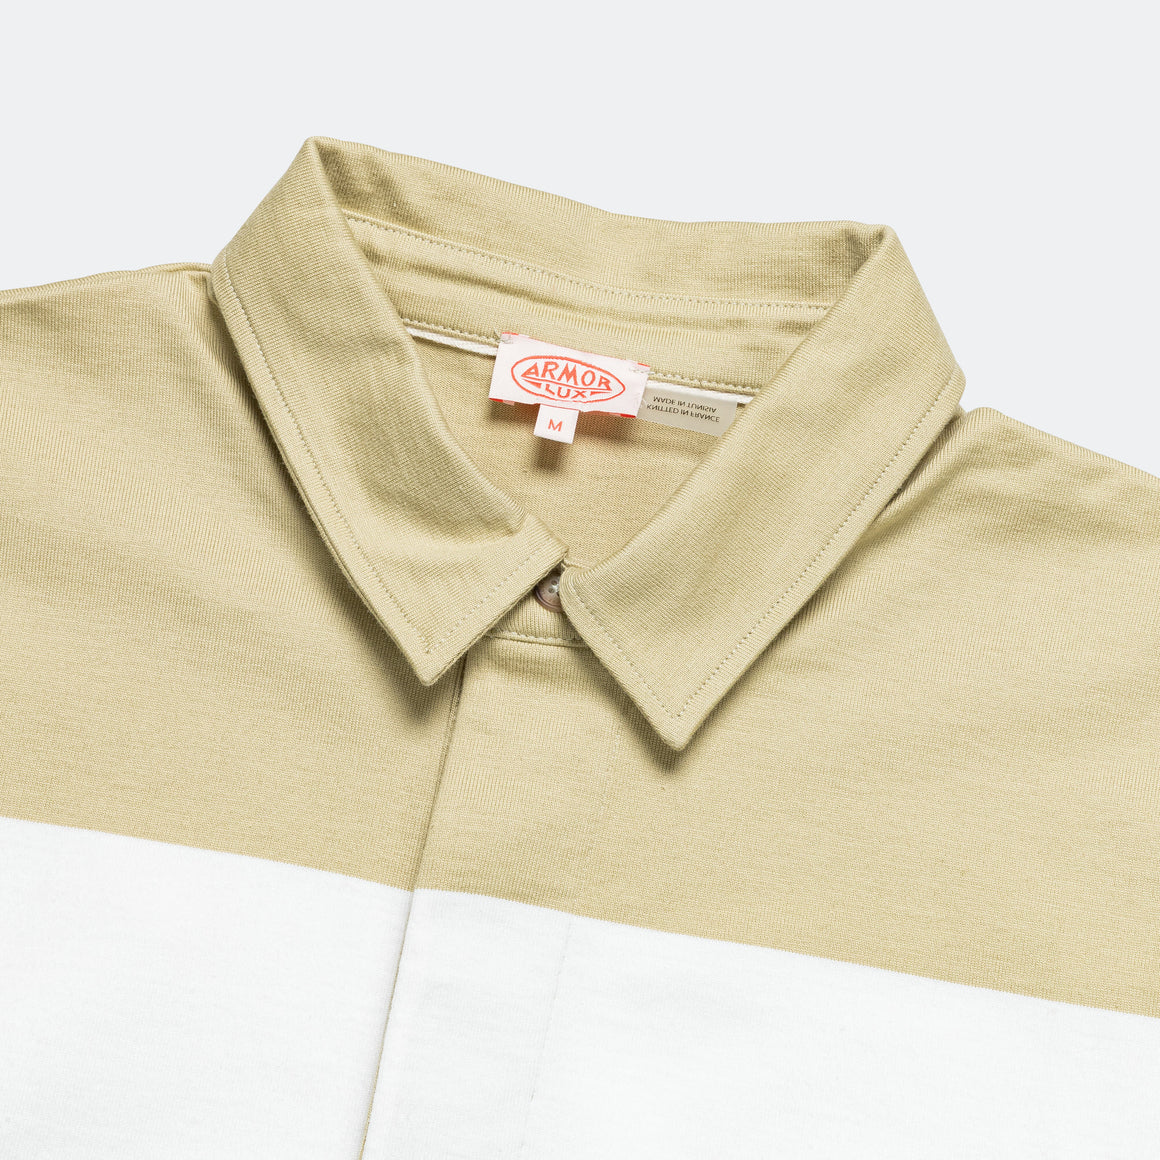 Armor Lux - Heritage SS Polo Shirt - Pale Olive/Milk - UP THERE